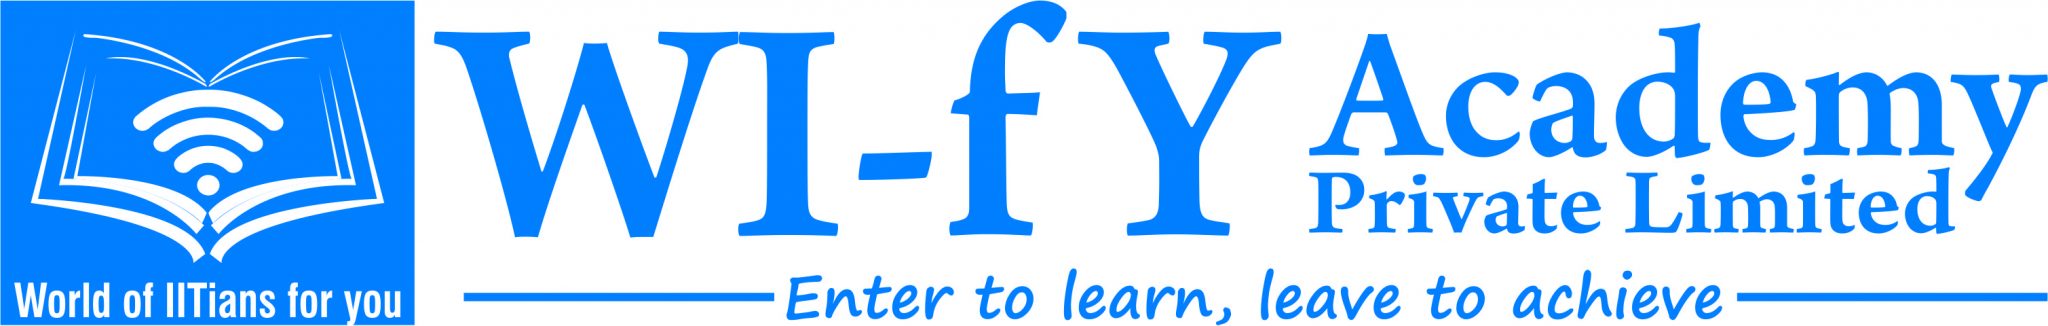 WI-fy Academy